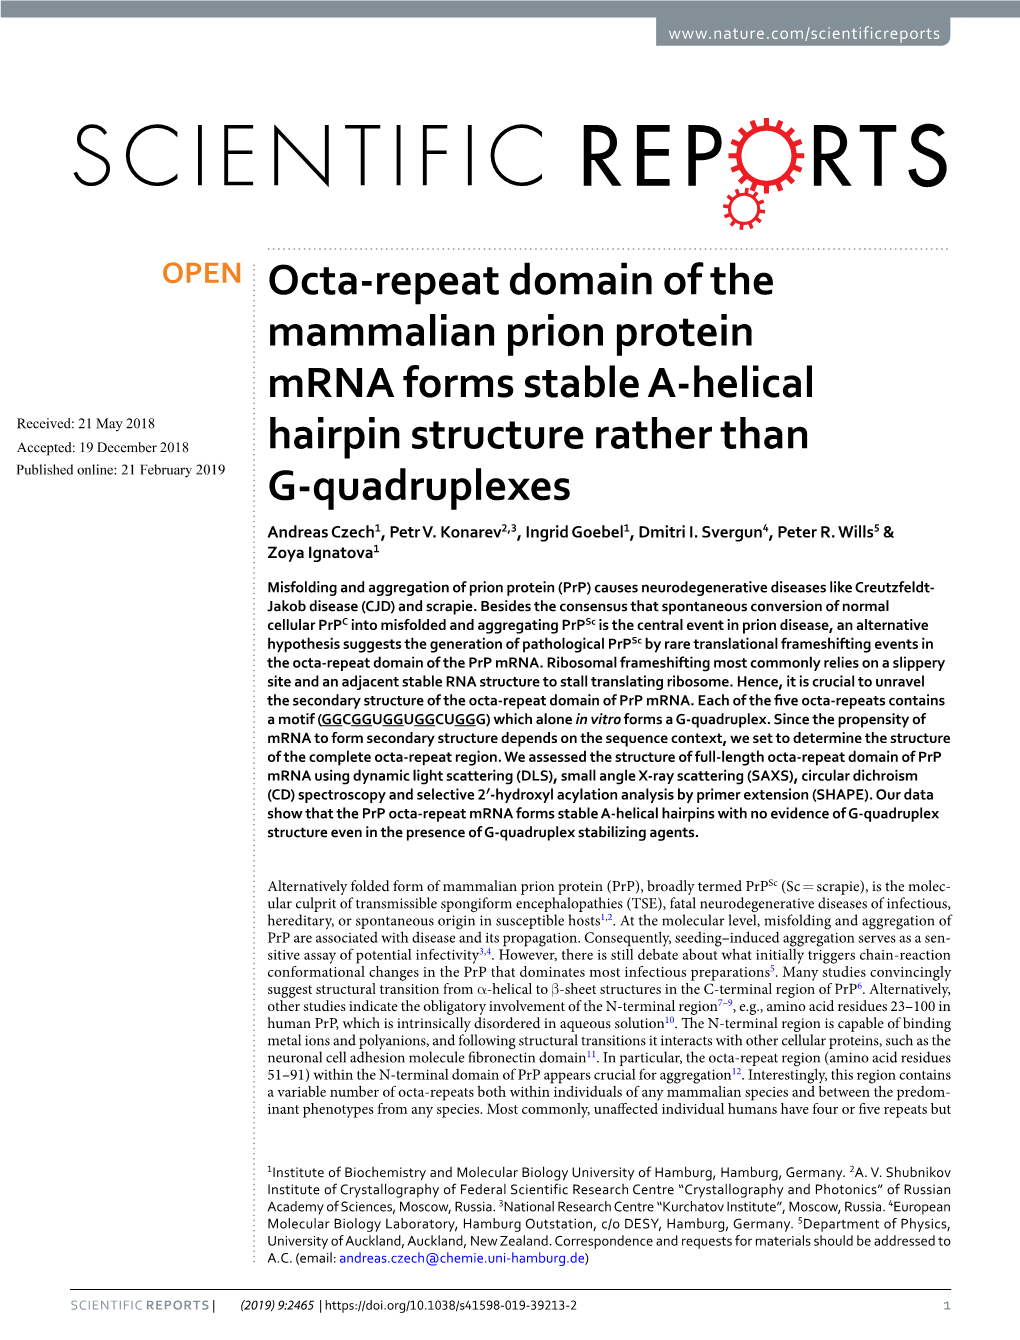 Octa-Repeat Domain of the Mammalian Prion Protein Mrna Forms Stable A-Helical Hairpin Structure Rather Than G-Quadruplexes